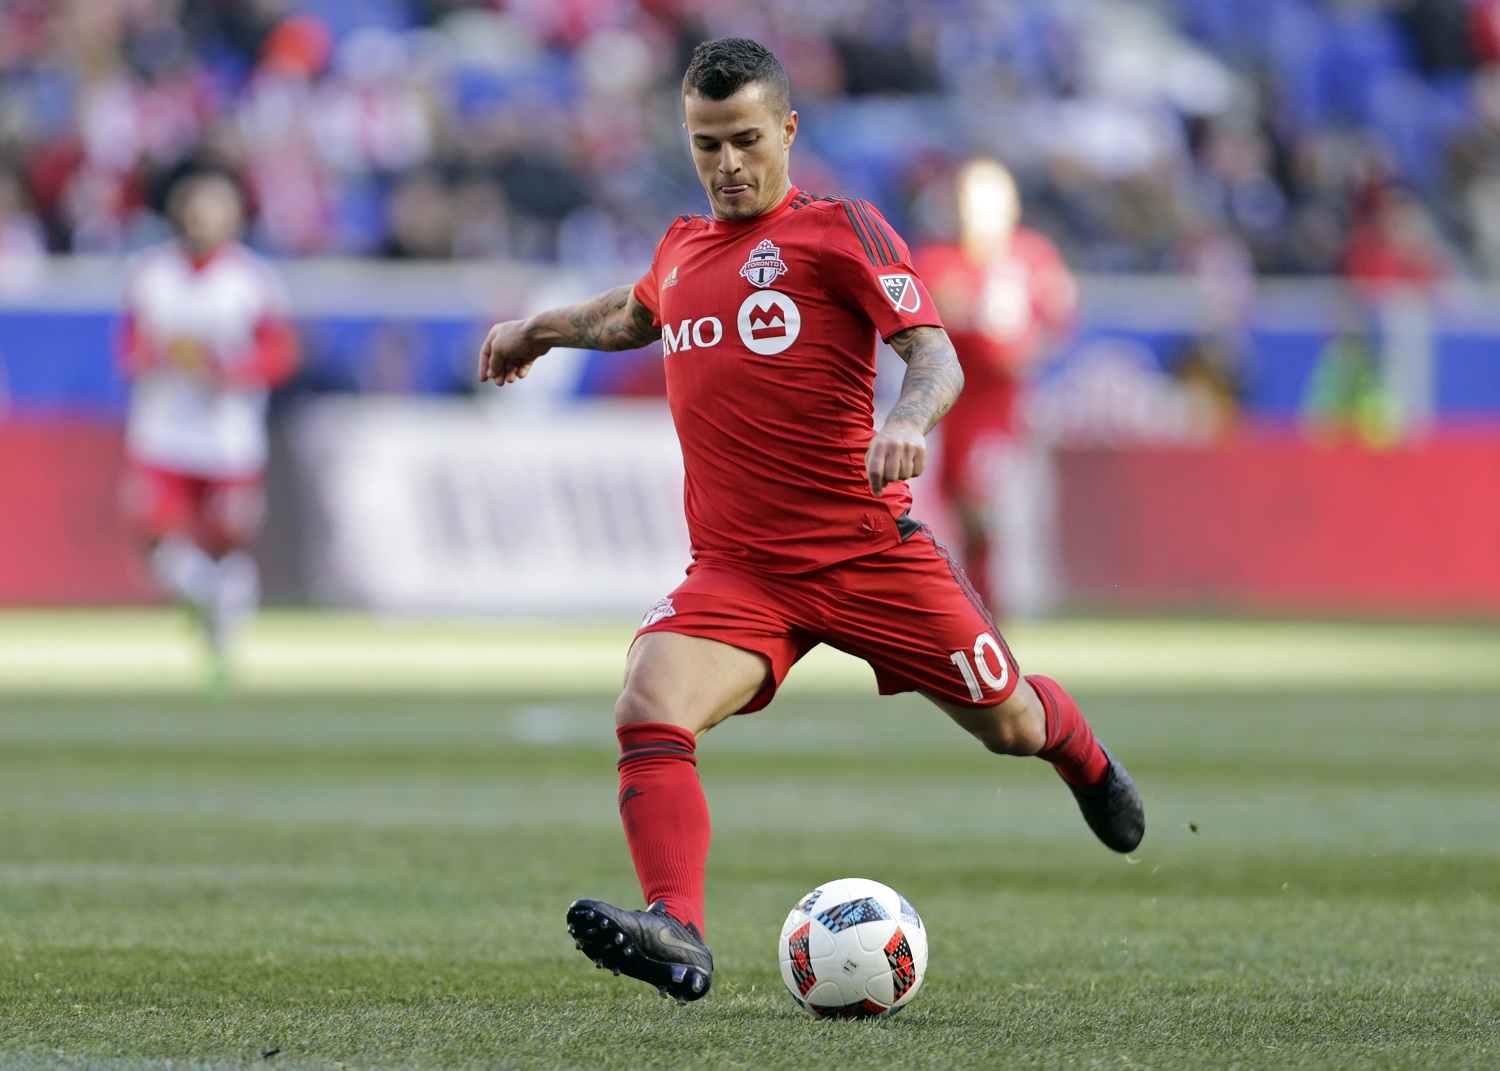 Toronto FC forward Sebastian Giovinco (10) takes a shot against the New York Red Bulls during the second half of an MLS soccer game Sunday, March 6, 2016, in Harrison, N.J. Toronto FC defeated the Red Bulls 2-0. (AP Photo/Adam Hunger)